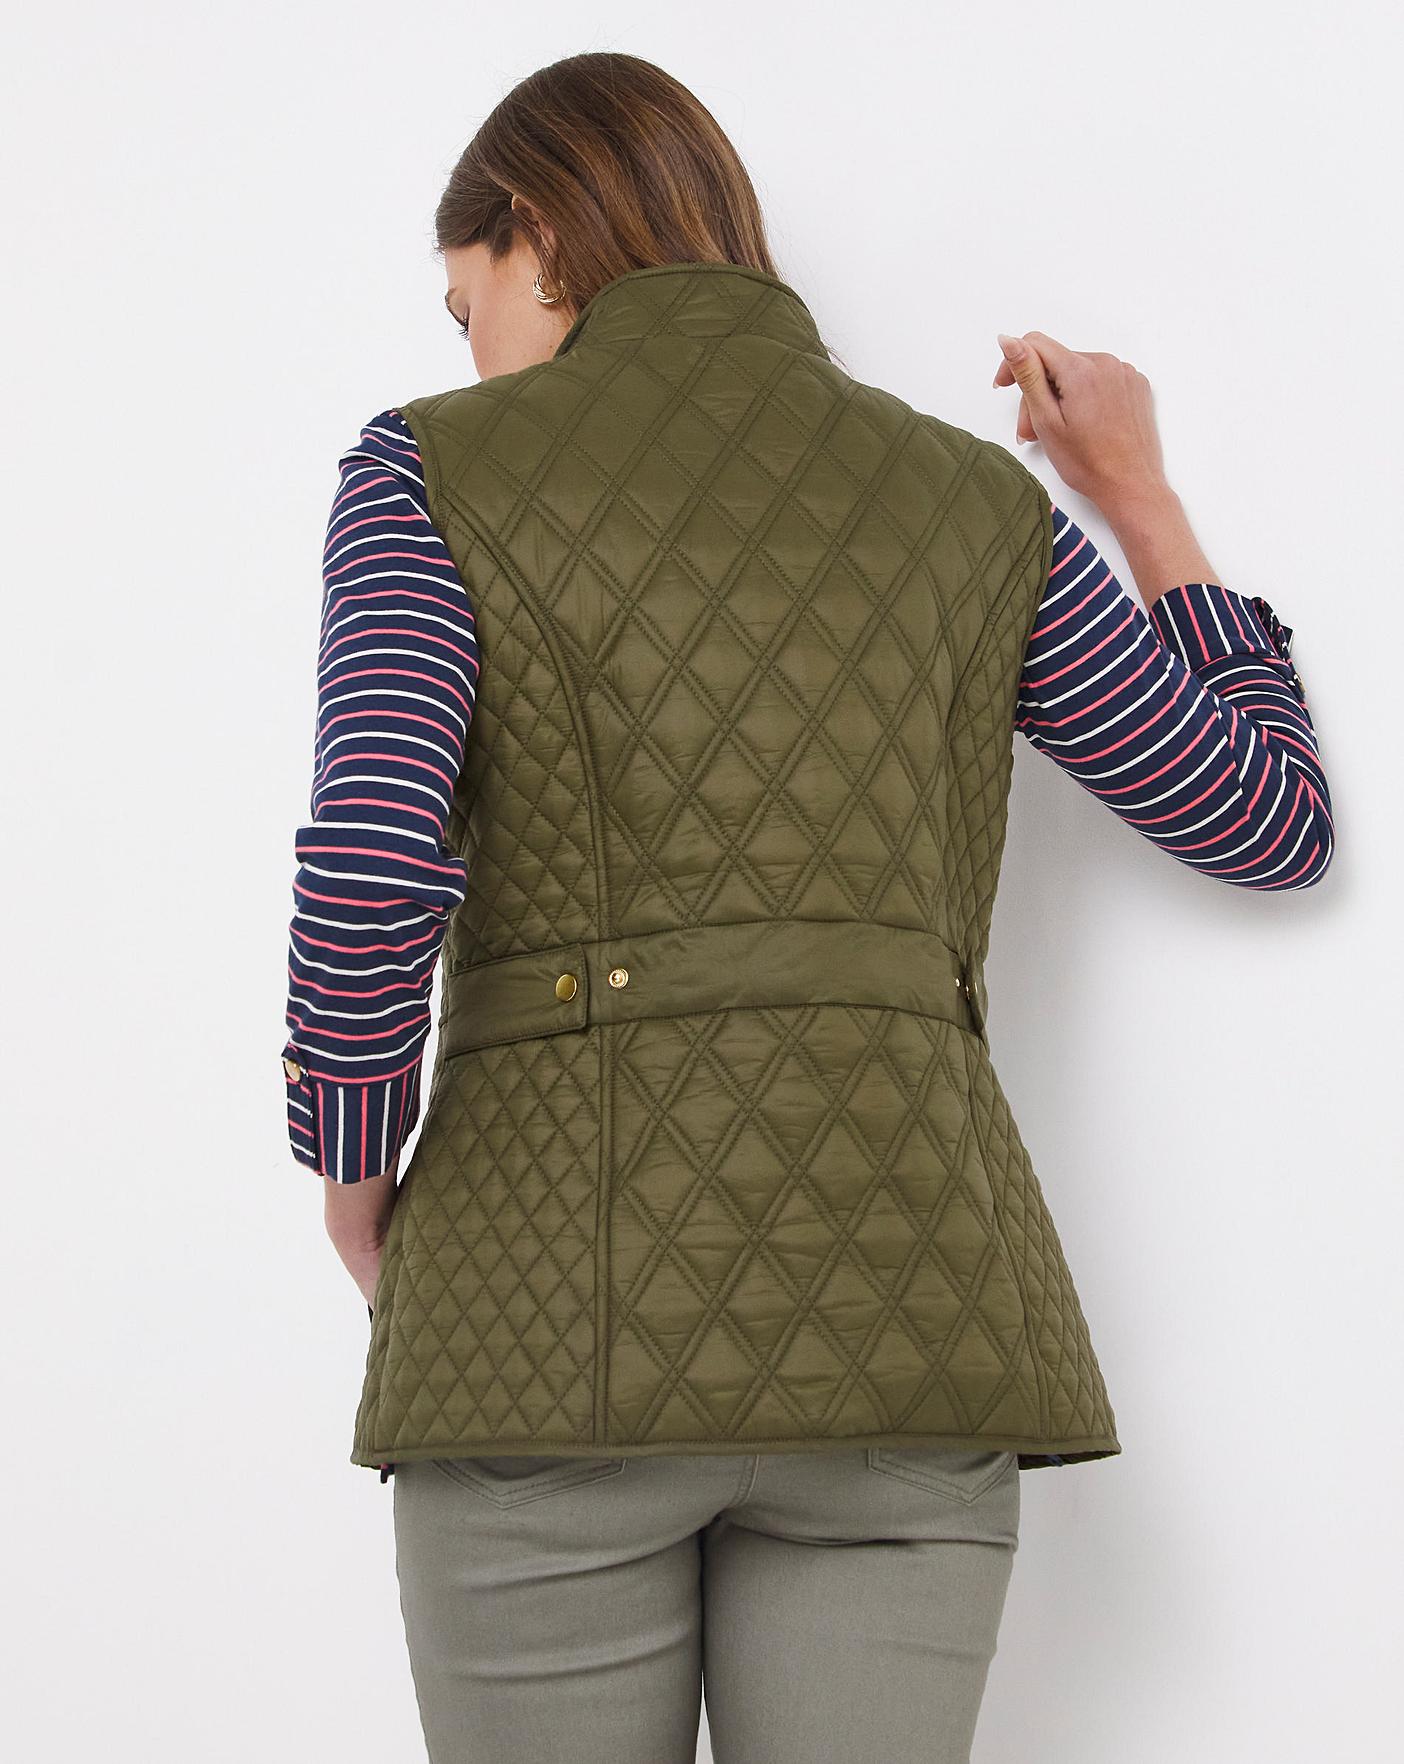 Julipa Quilted Gilet | J D Williams